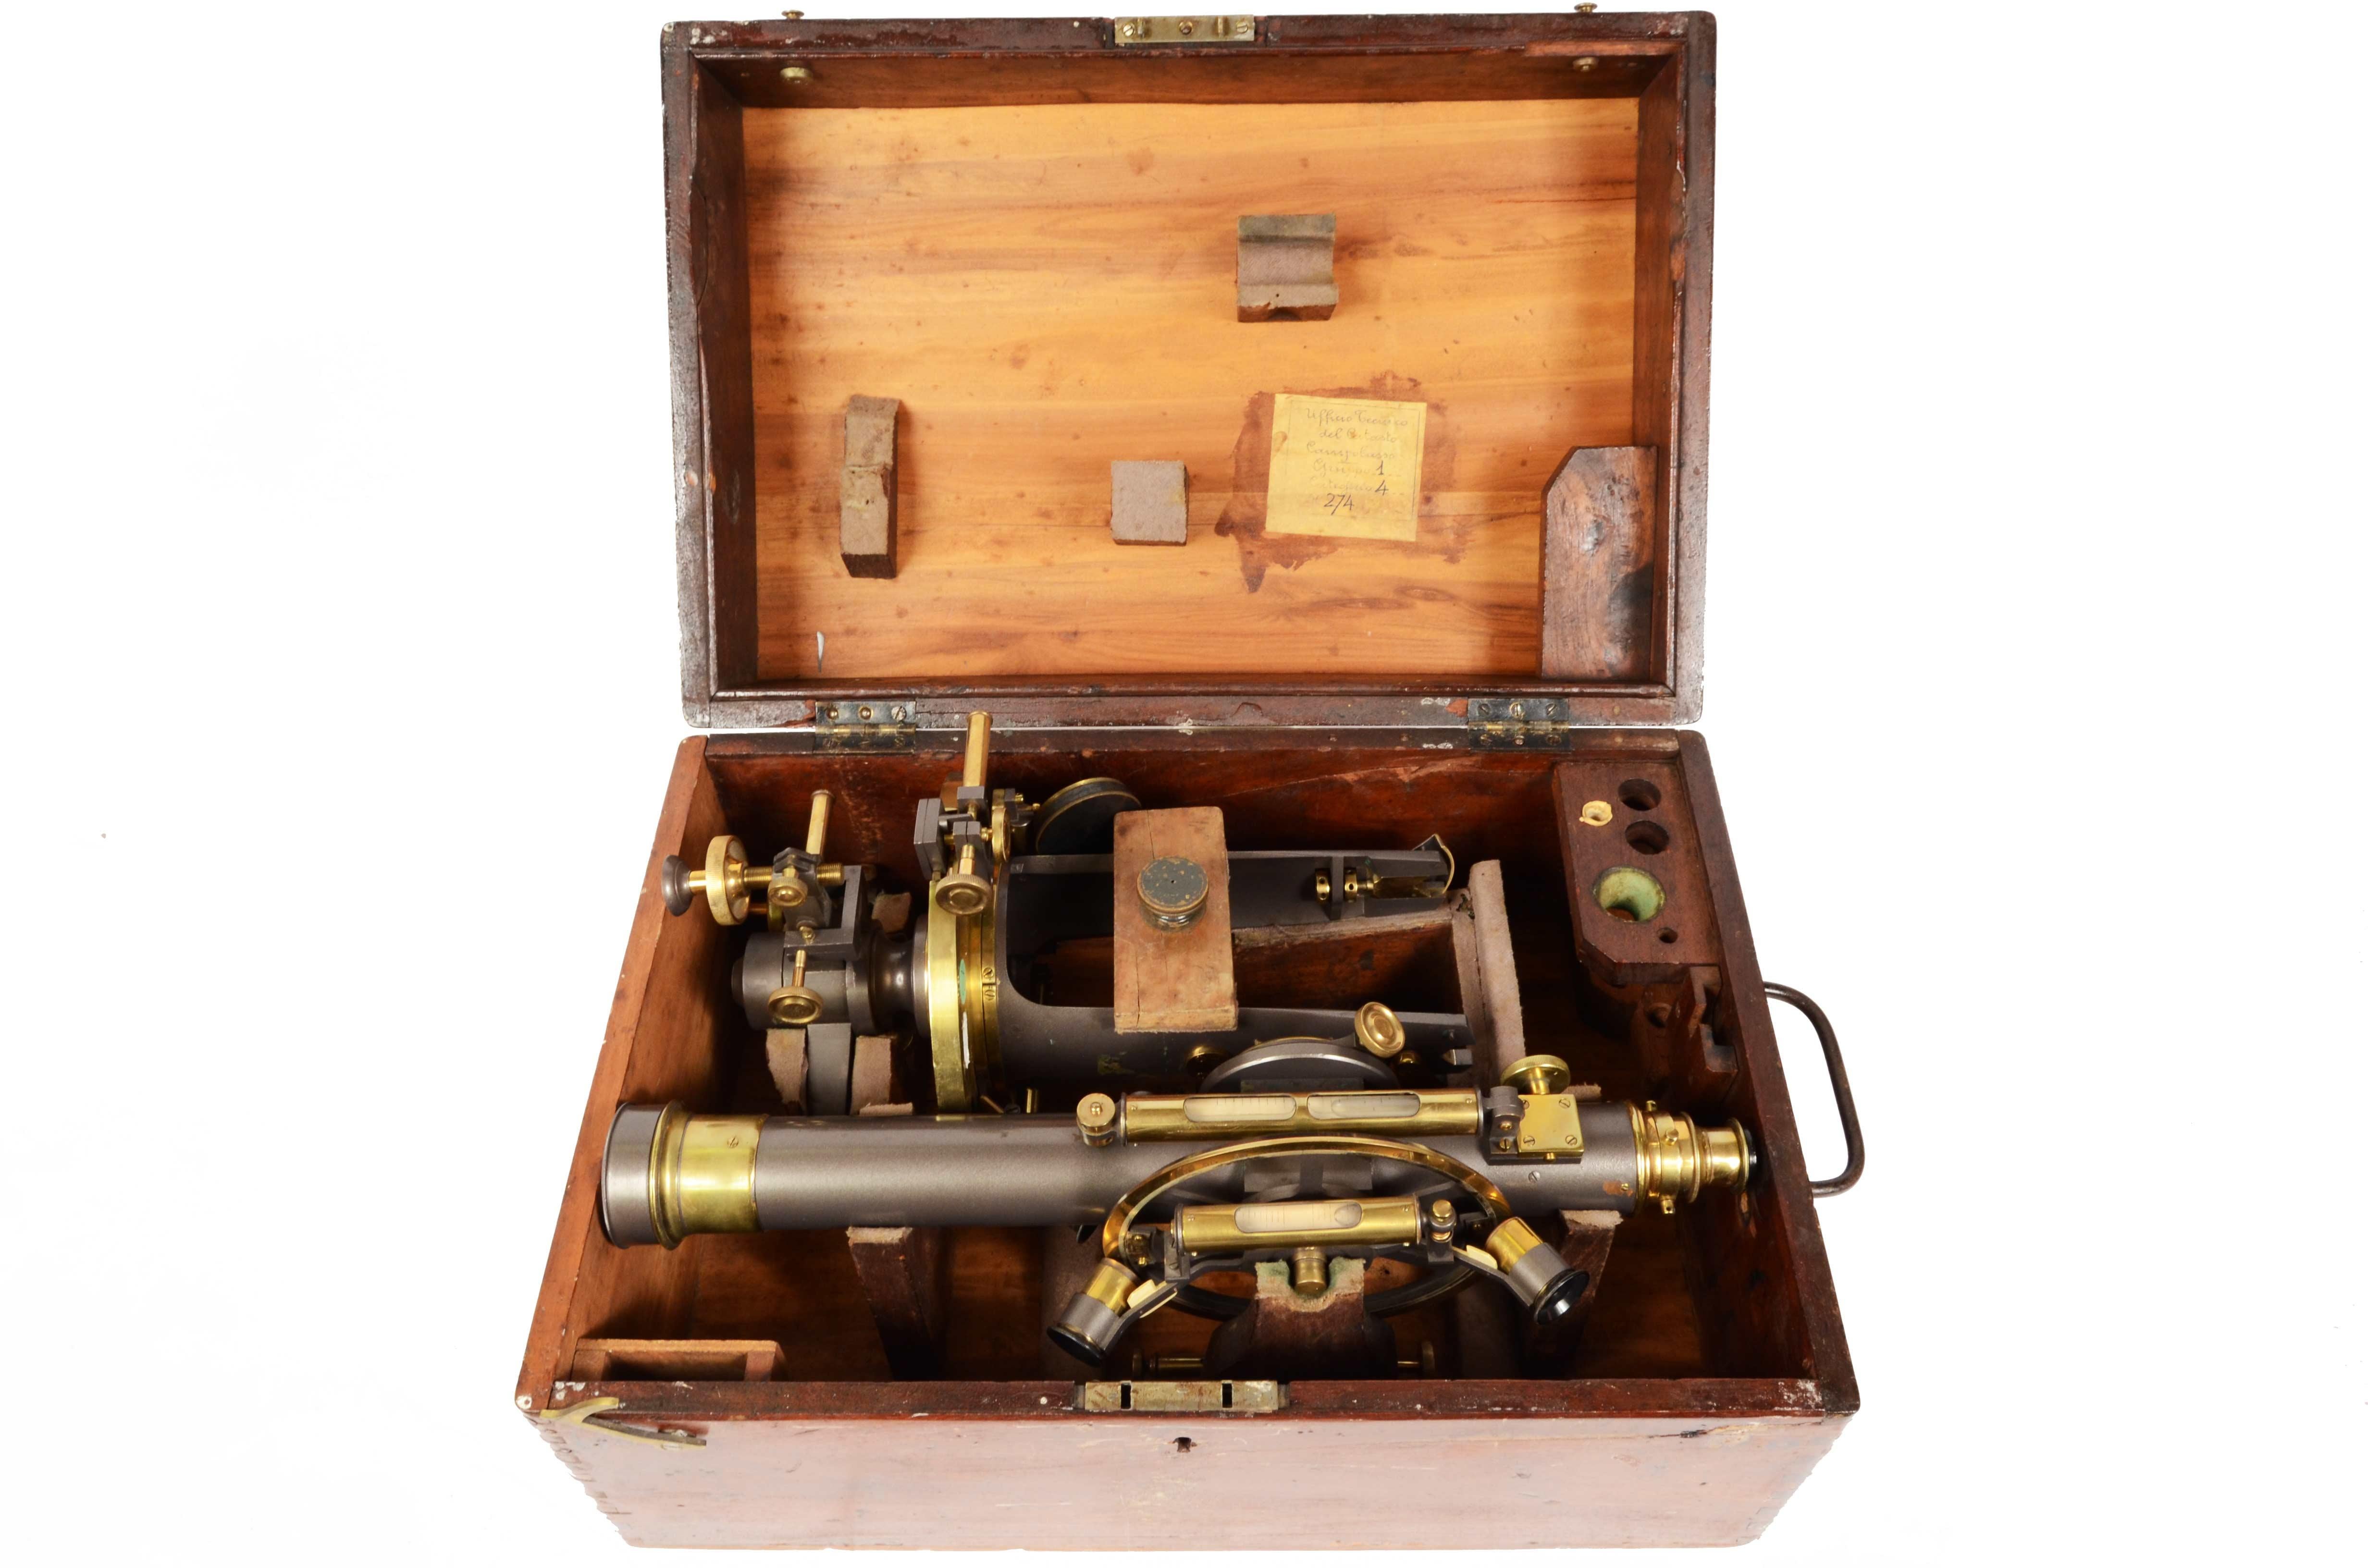 Burnished brass theodolite with long telescope complete with original walnut case, Italian manufacture from the second half of the 19th century. A label placed inside the cash box informs that this tool was used by the Campobasso cadastre. This